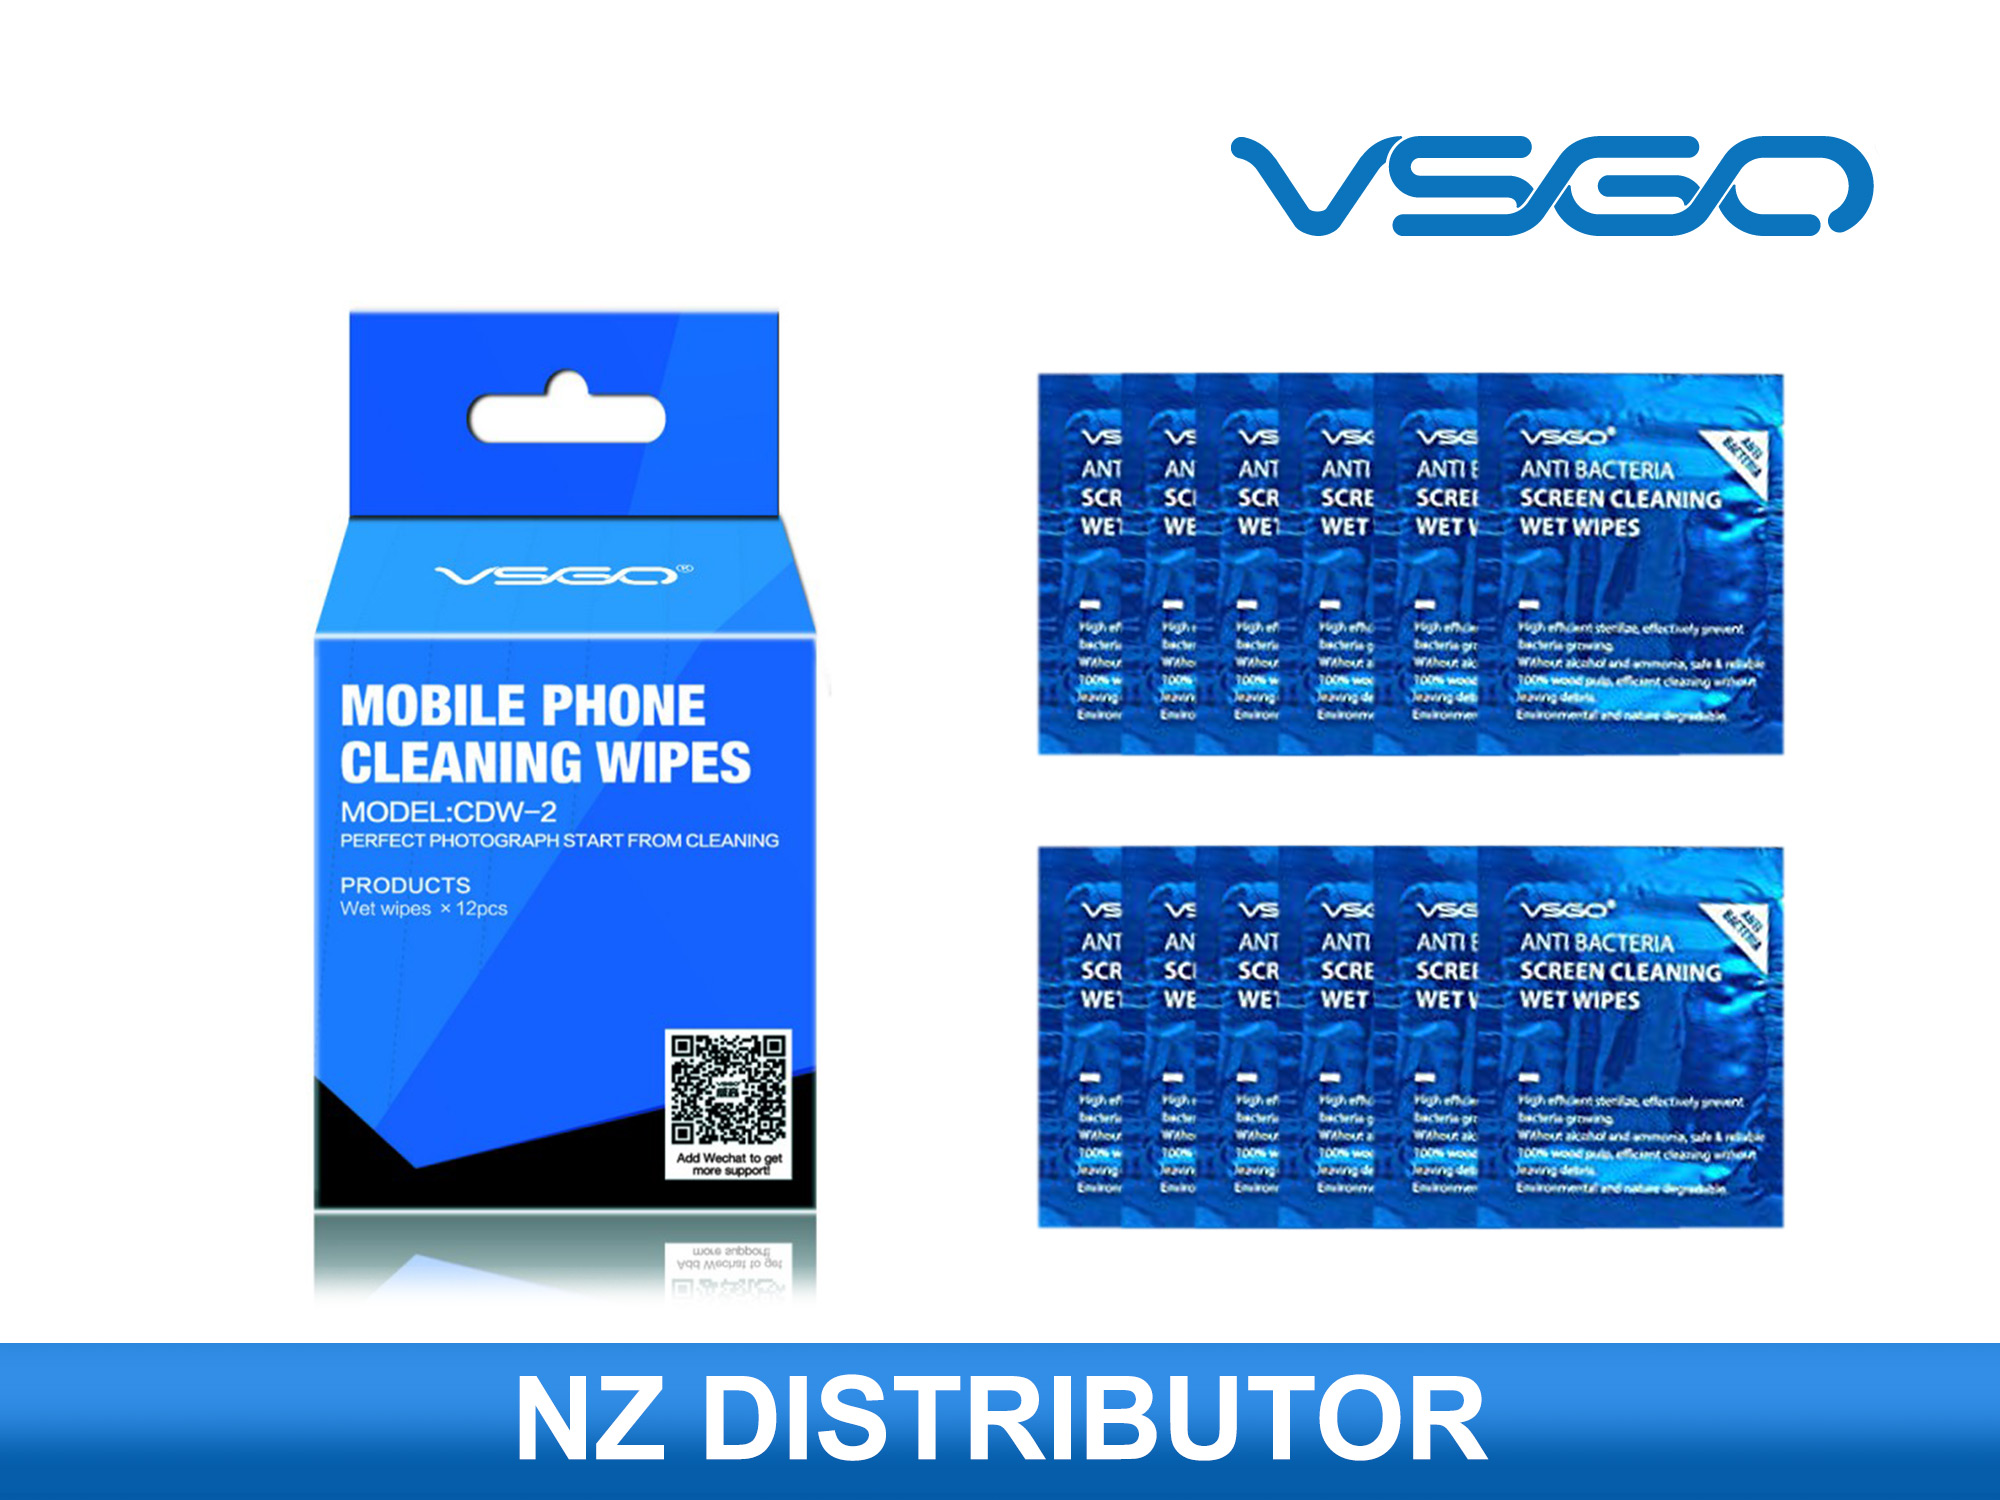 VSGO Mobile Phone Cleaning Wipes